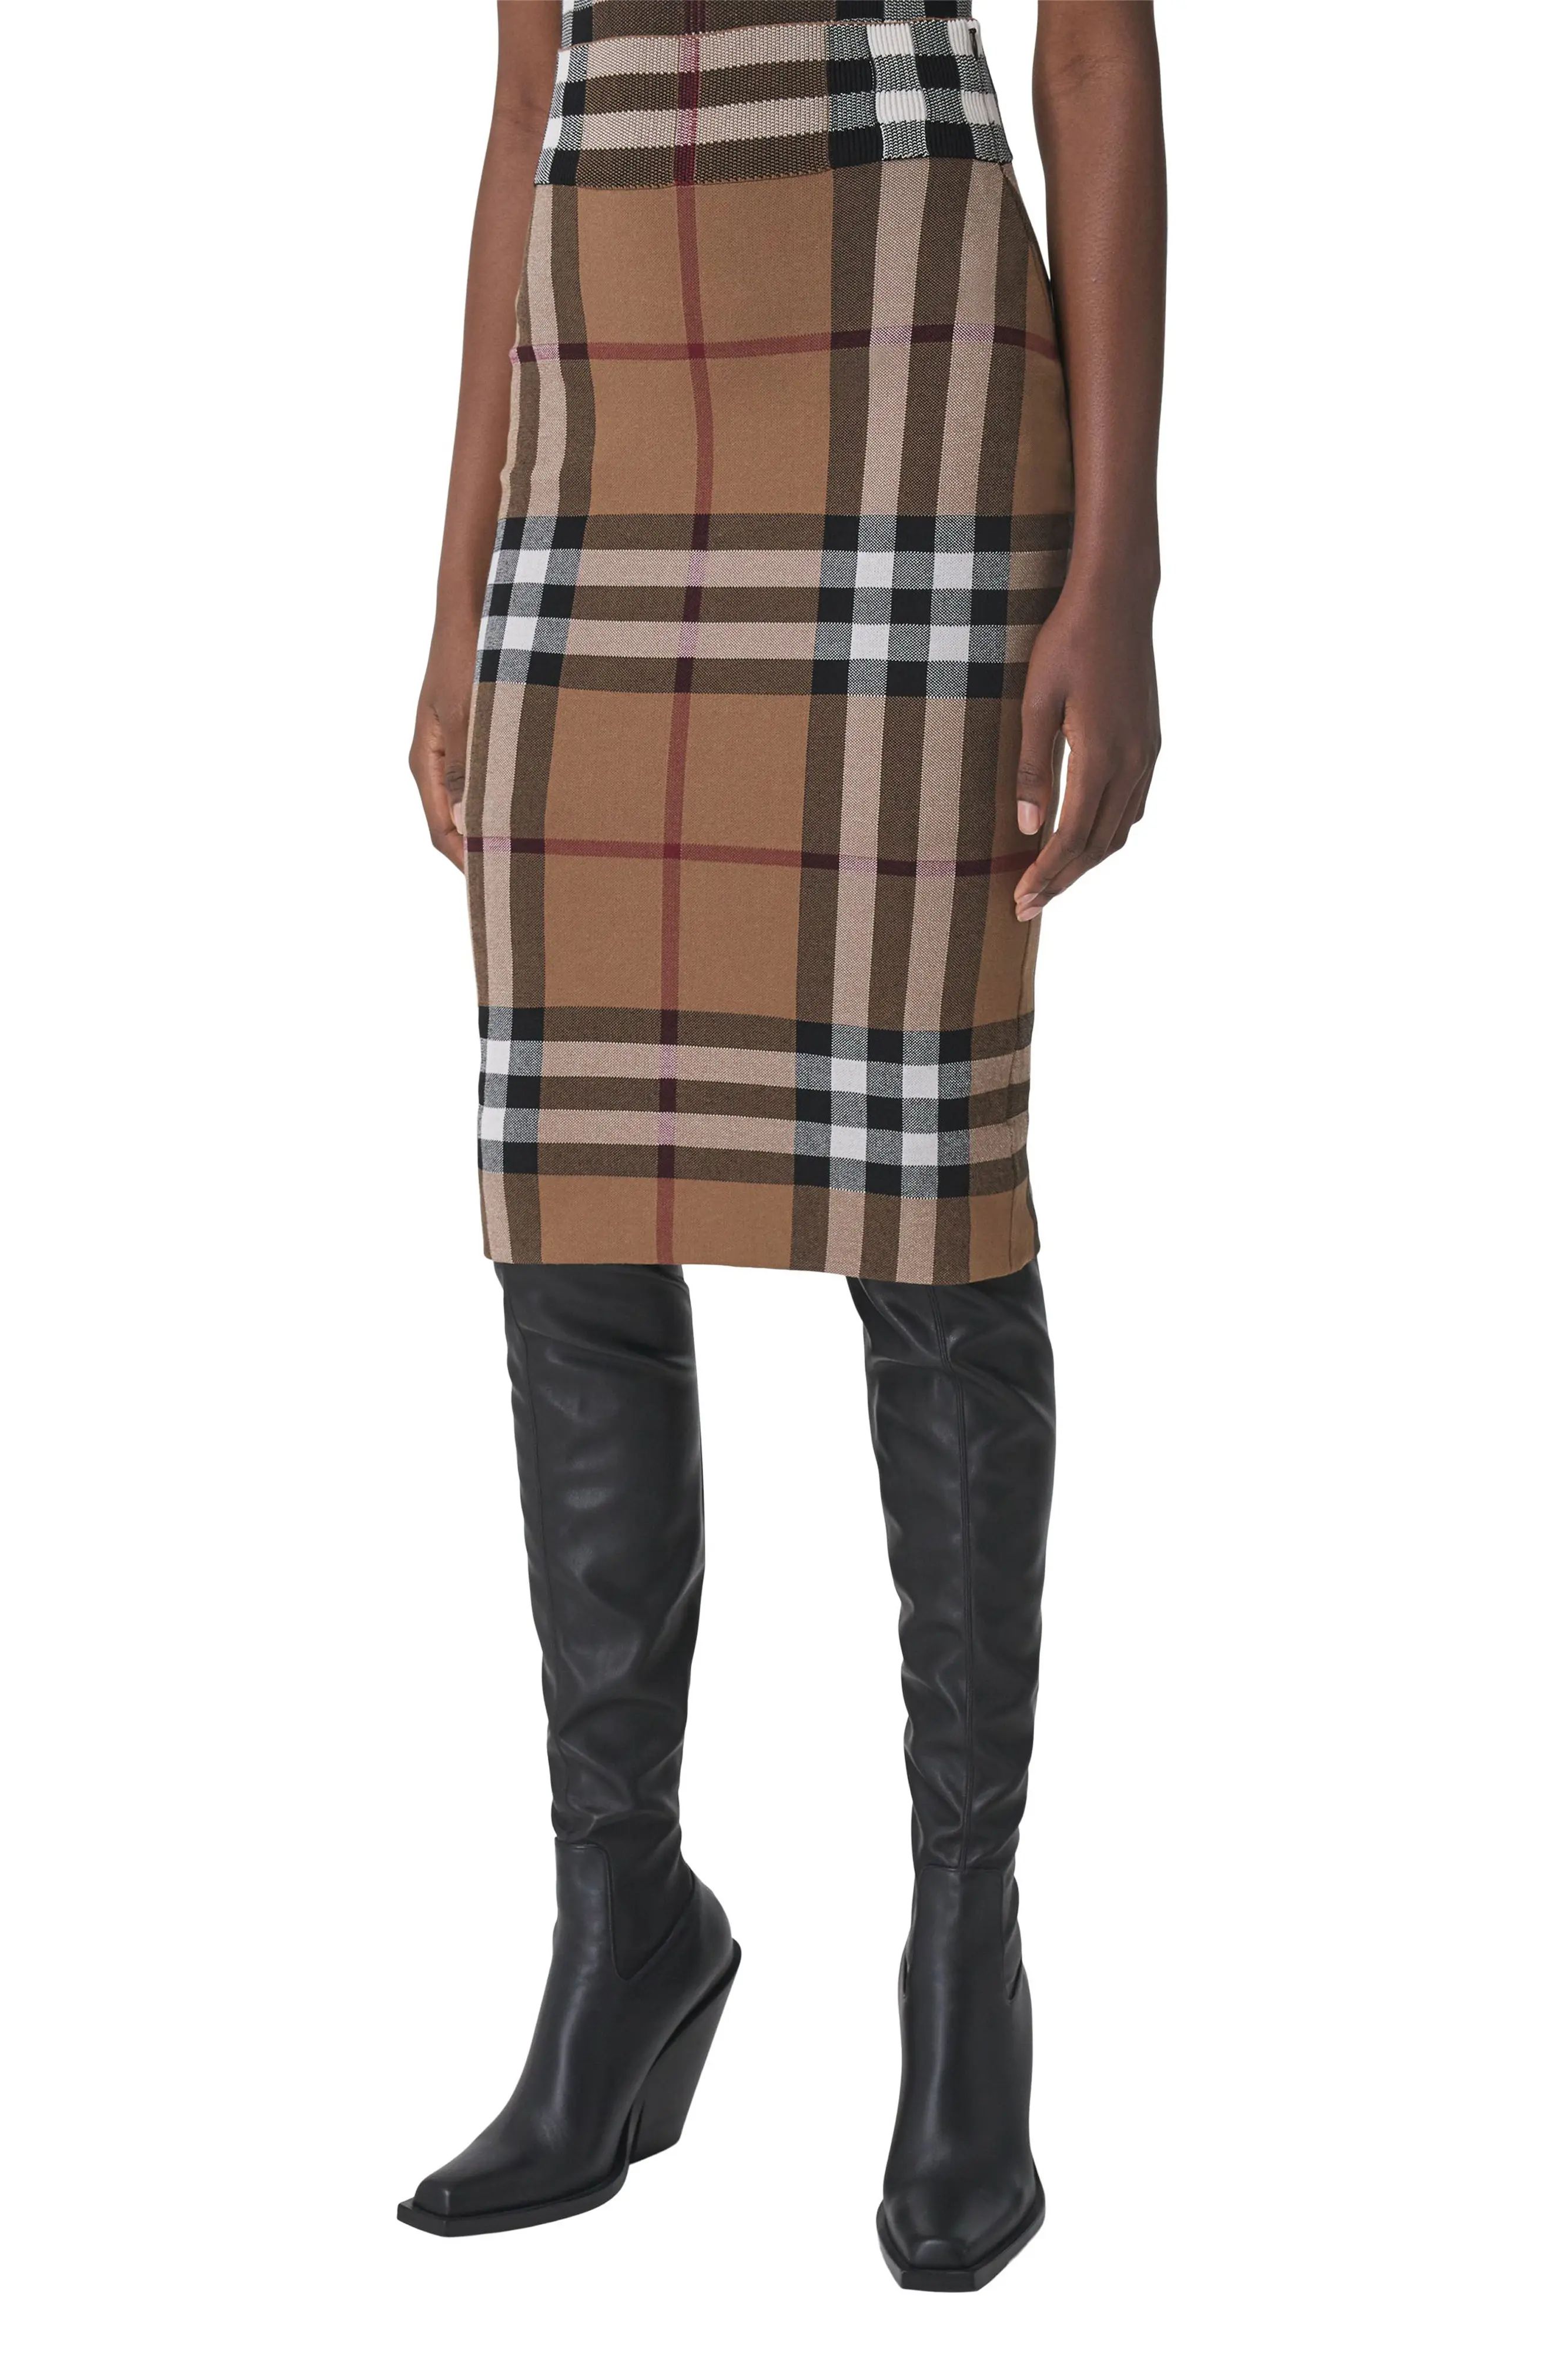 Burberry Kammie Check Jacquard Tube Skirt, Size Xx-Small in Birch Brown at Nordstrom | Nordstrom